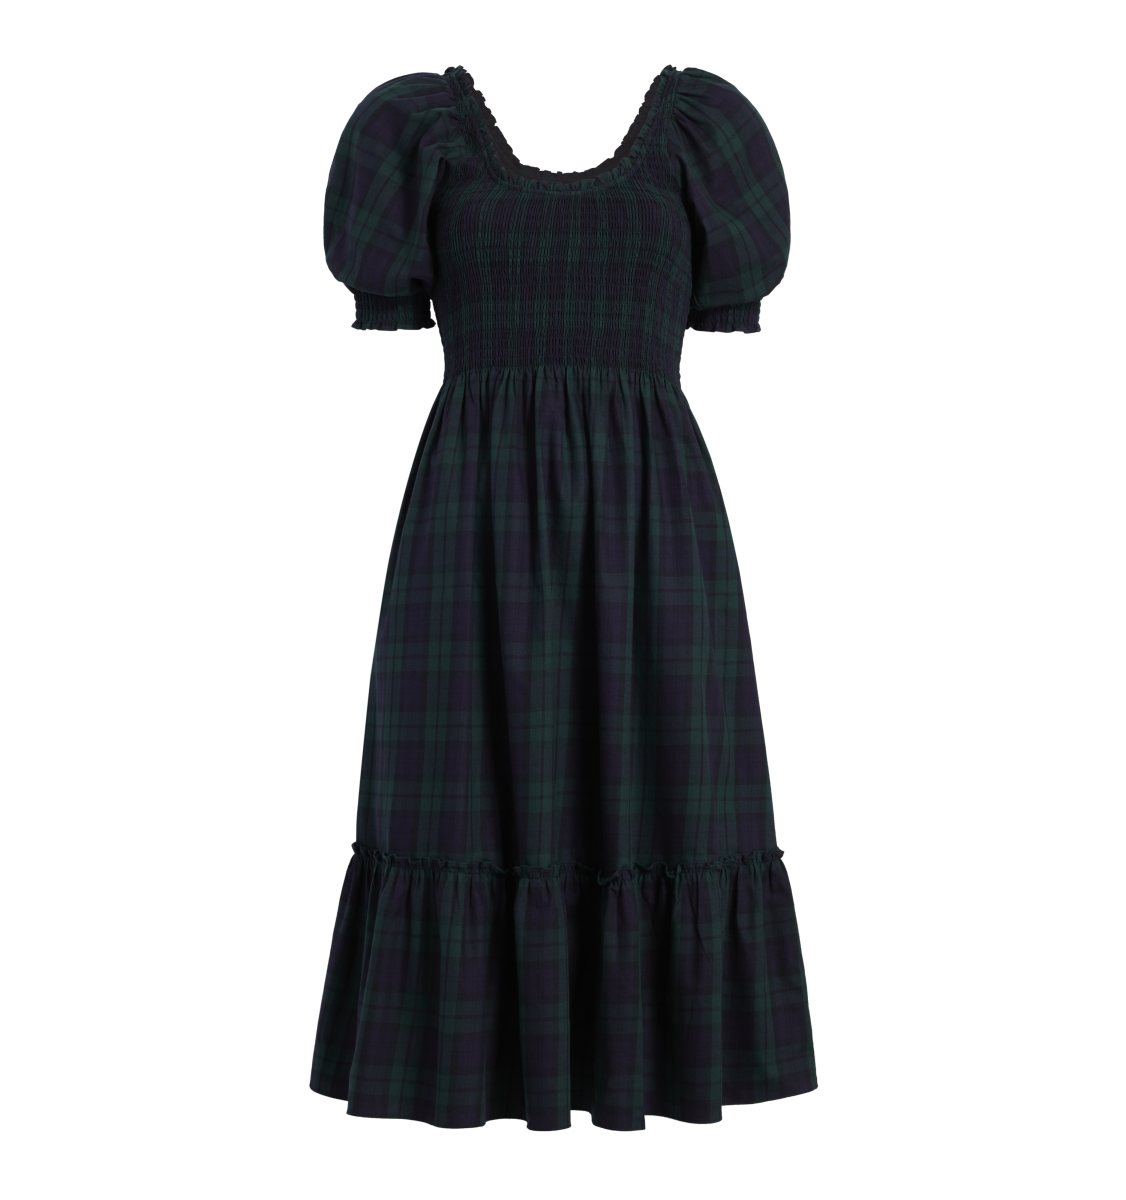 Hill House Home The Louisa Nap Dress, $150, available here (sizes XXS-XXL).